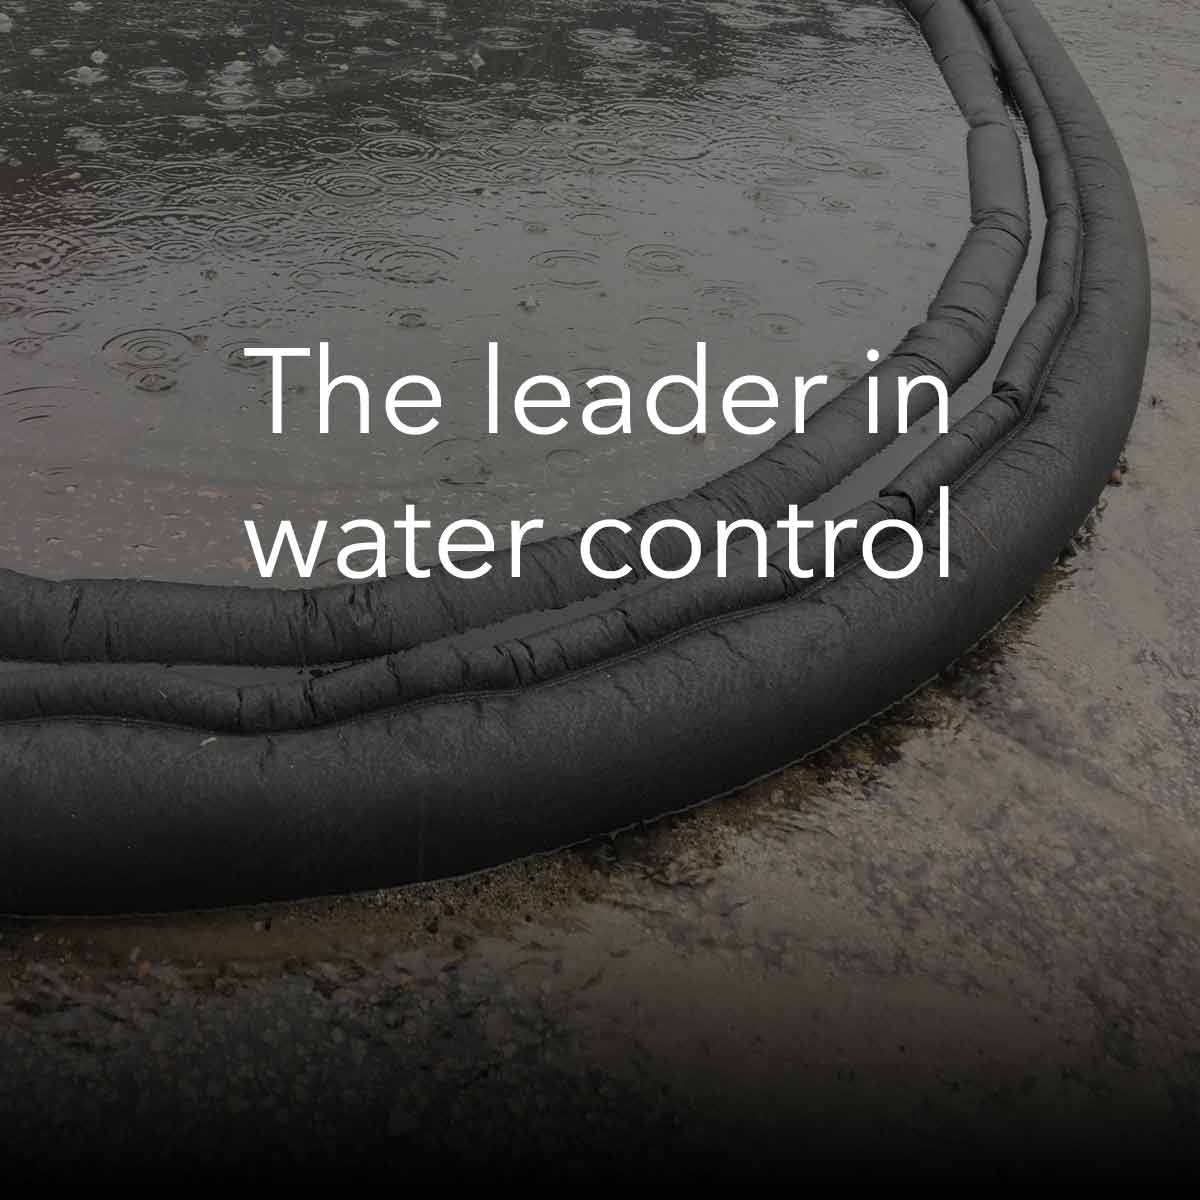 The leader in water control